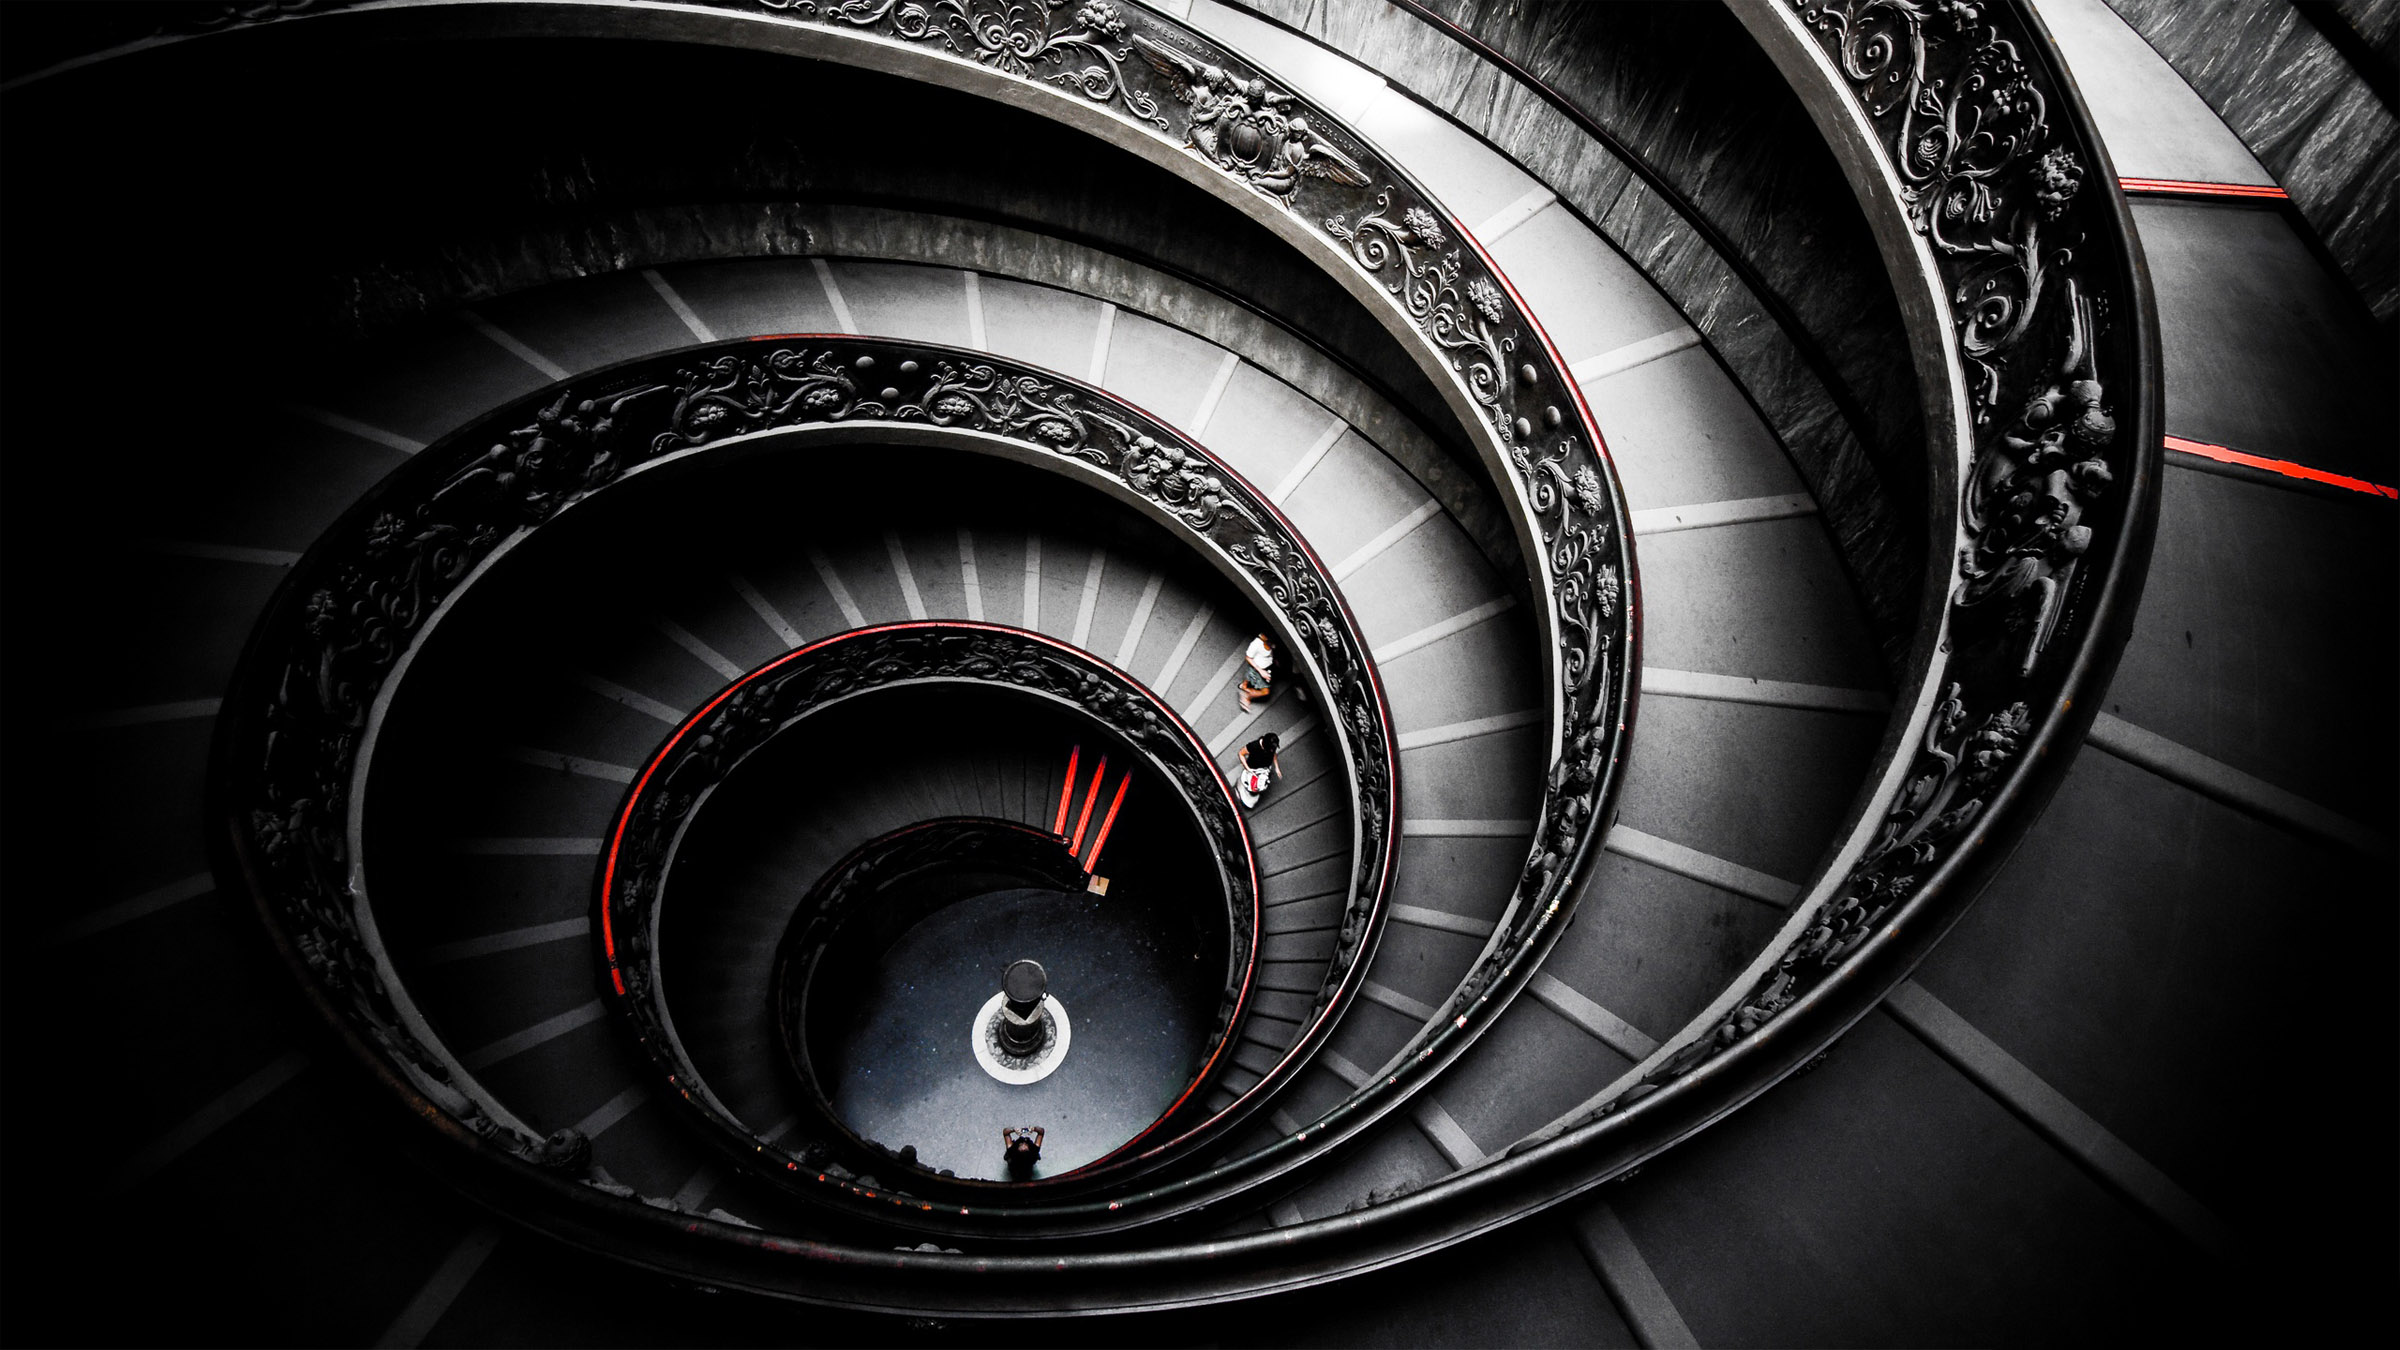 Stairs Monochrome Selective Coloring Circle Architecture Vatican City Rome Italy 2400x1350